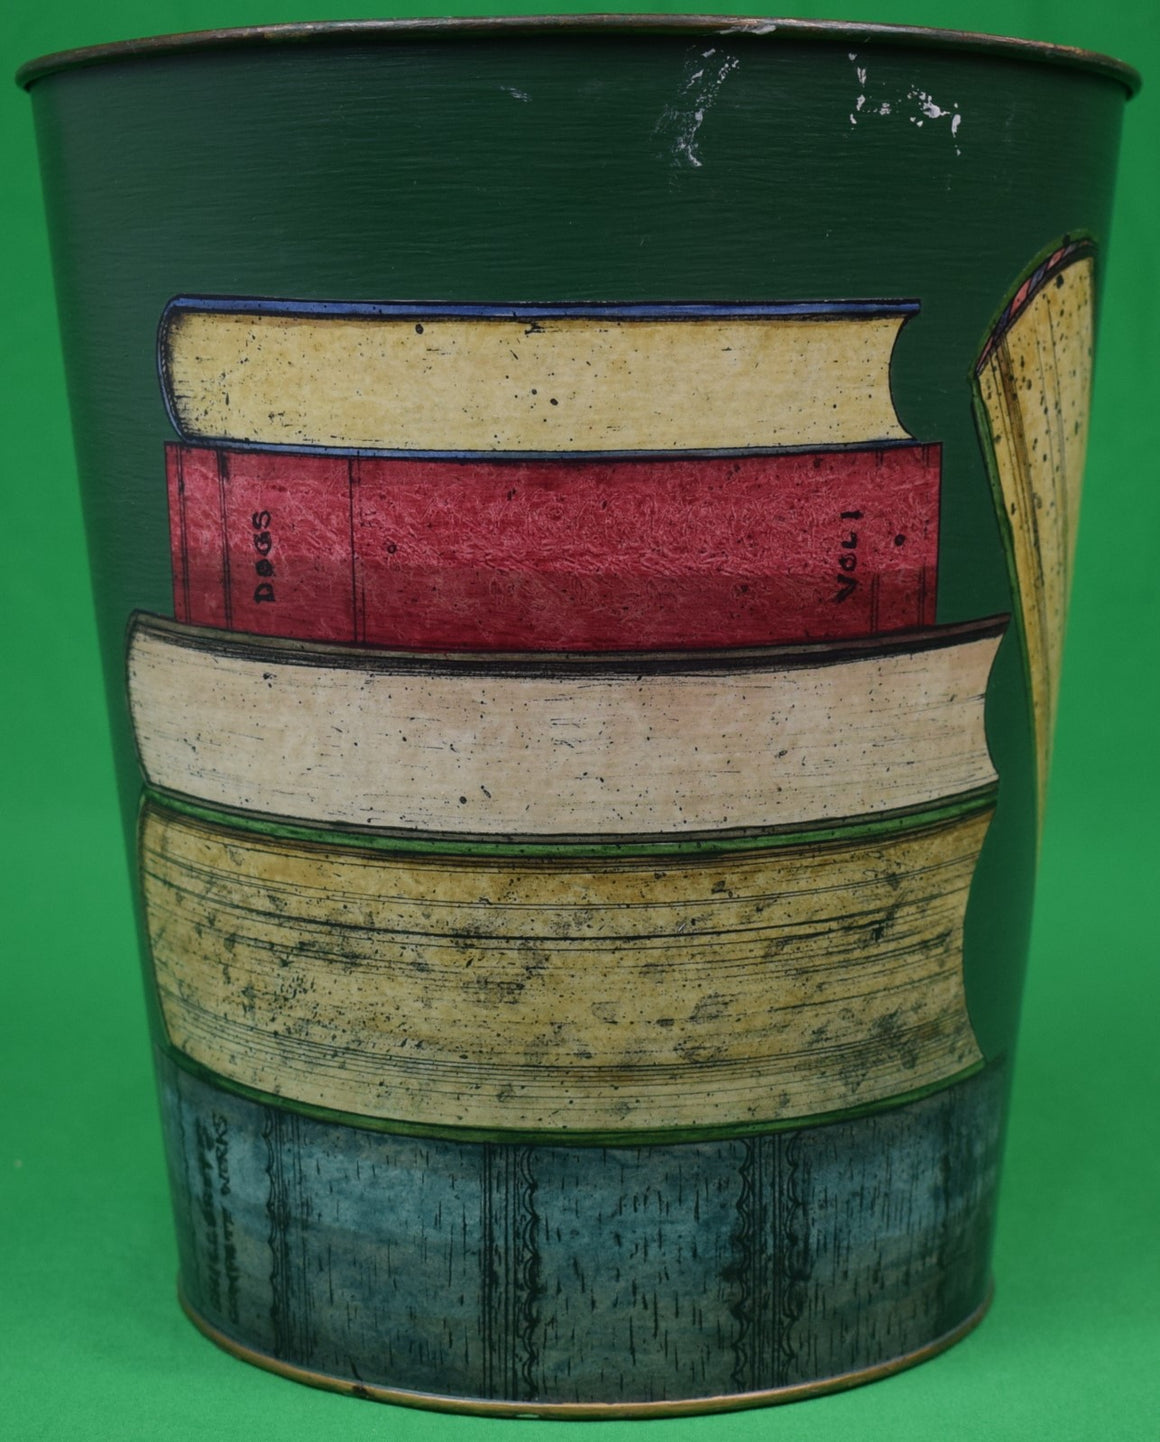 "Regency Ware English Hand-Painted Library Wastebasket" (SOLD)